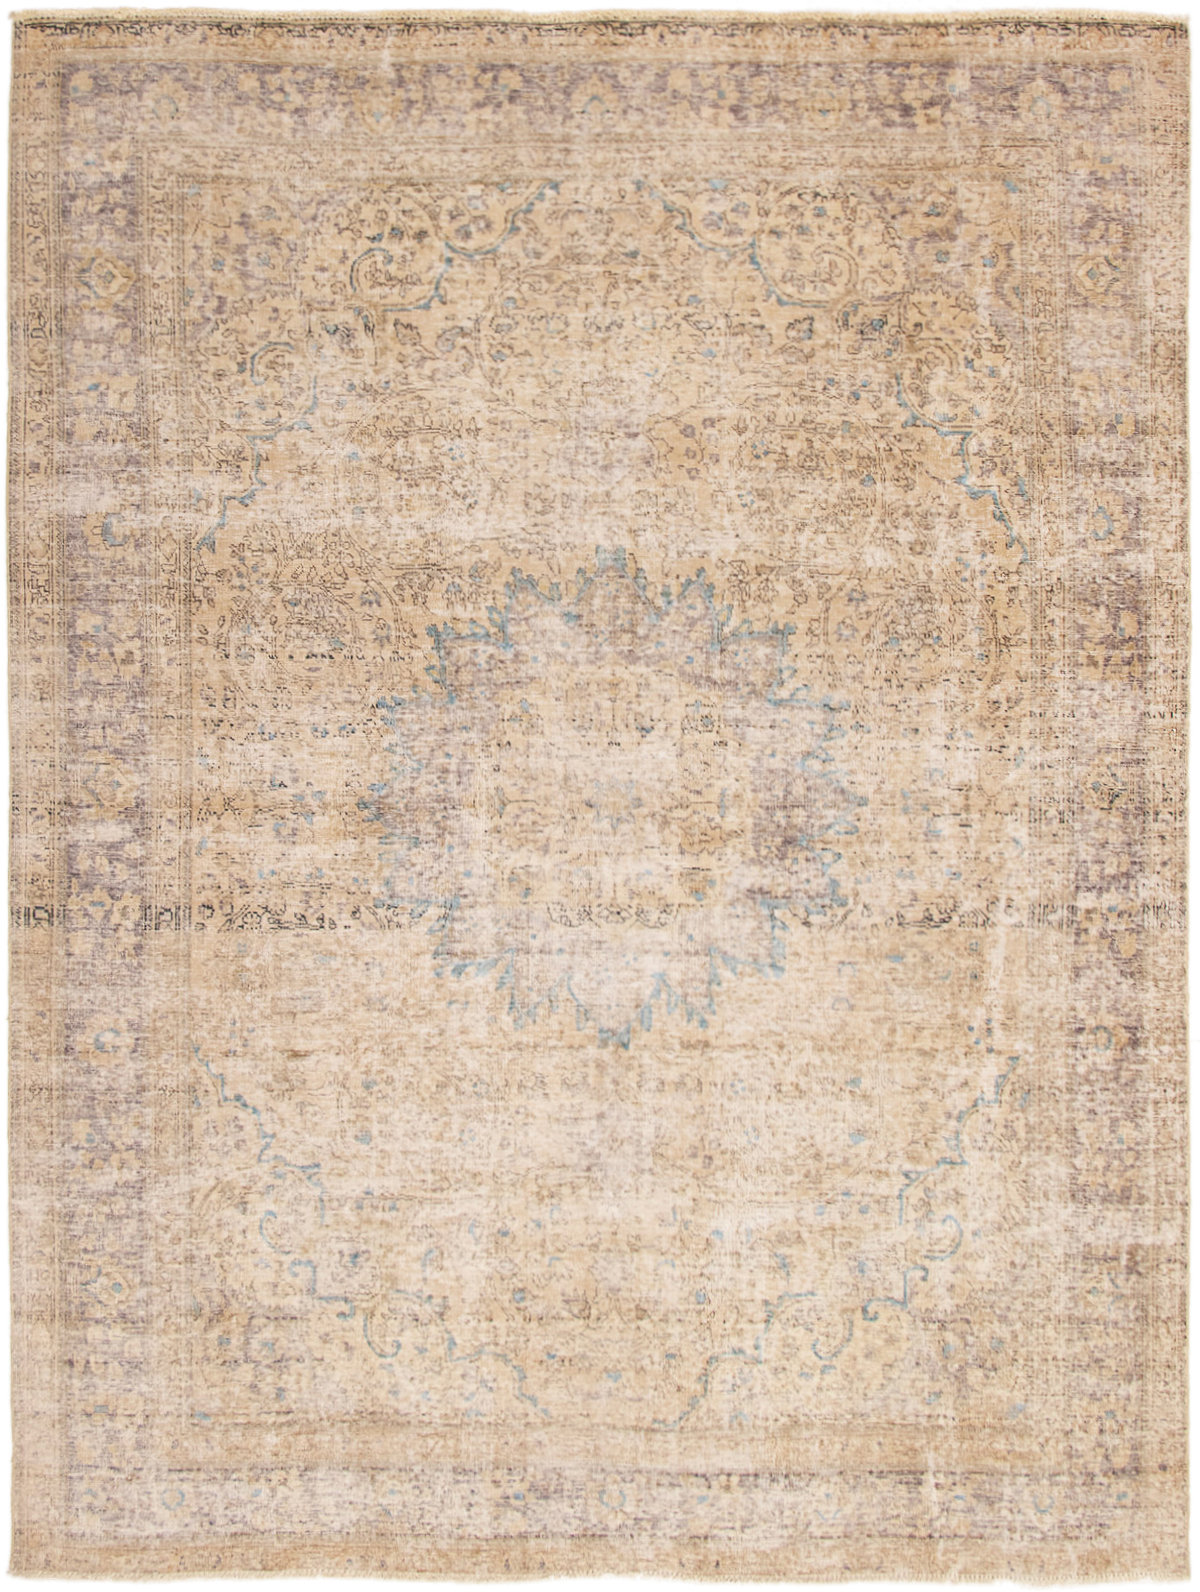 Hand-knotted Color Transition Khaki, Light Khaki Wool Rug 8'5" x 11'0" Size: 8'5" x 11'0"  